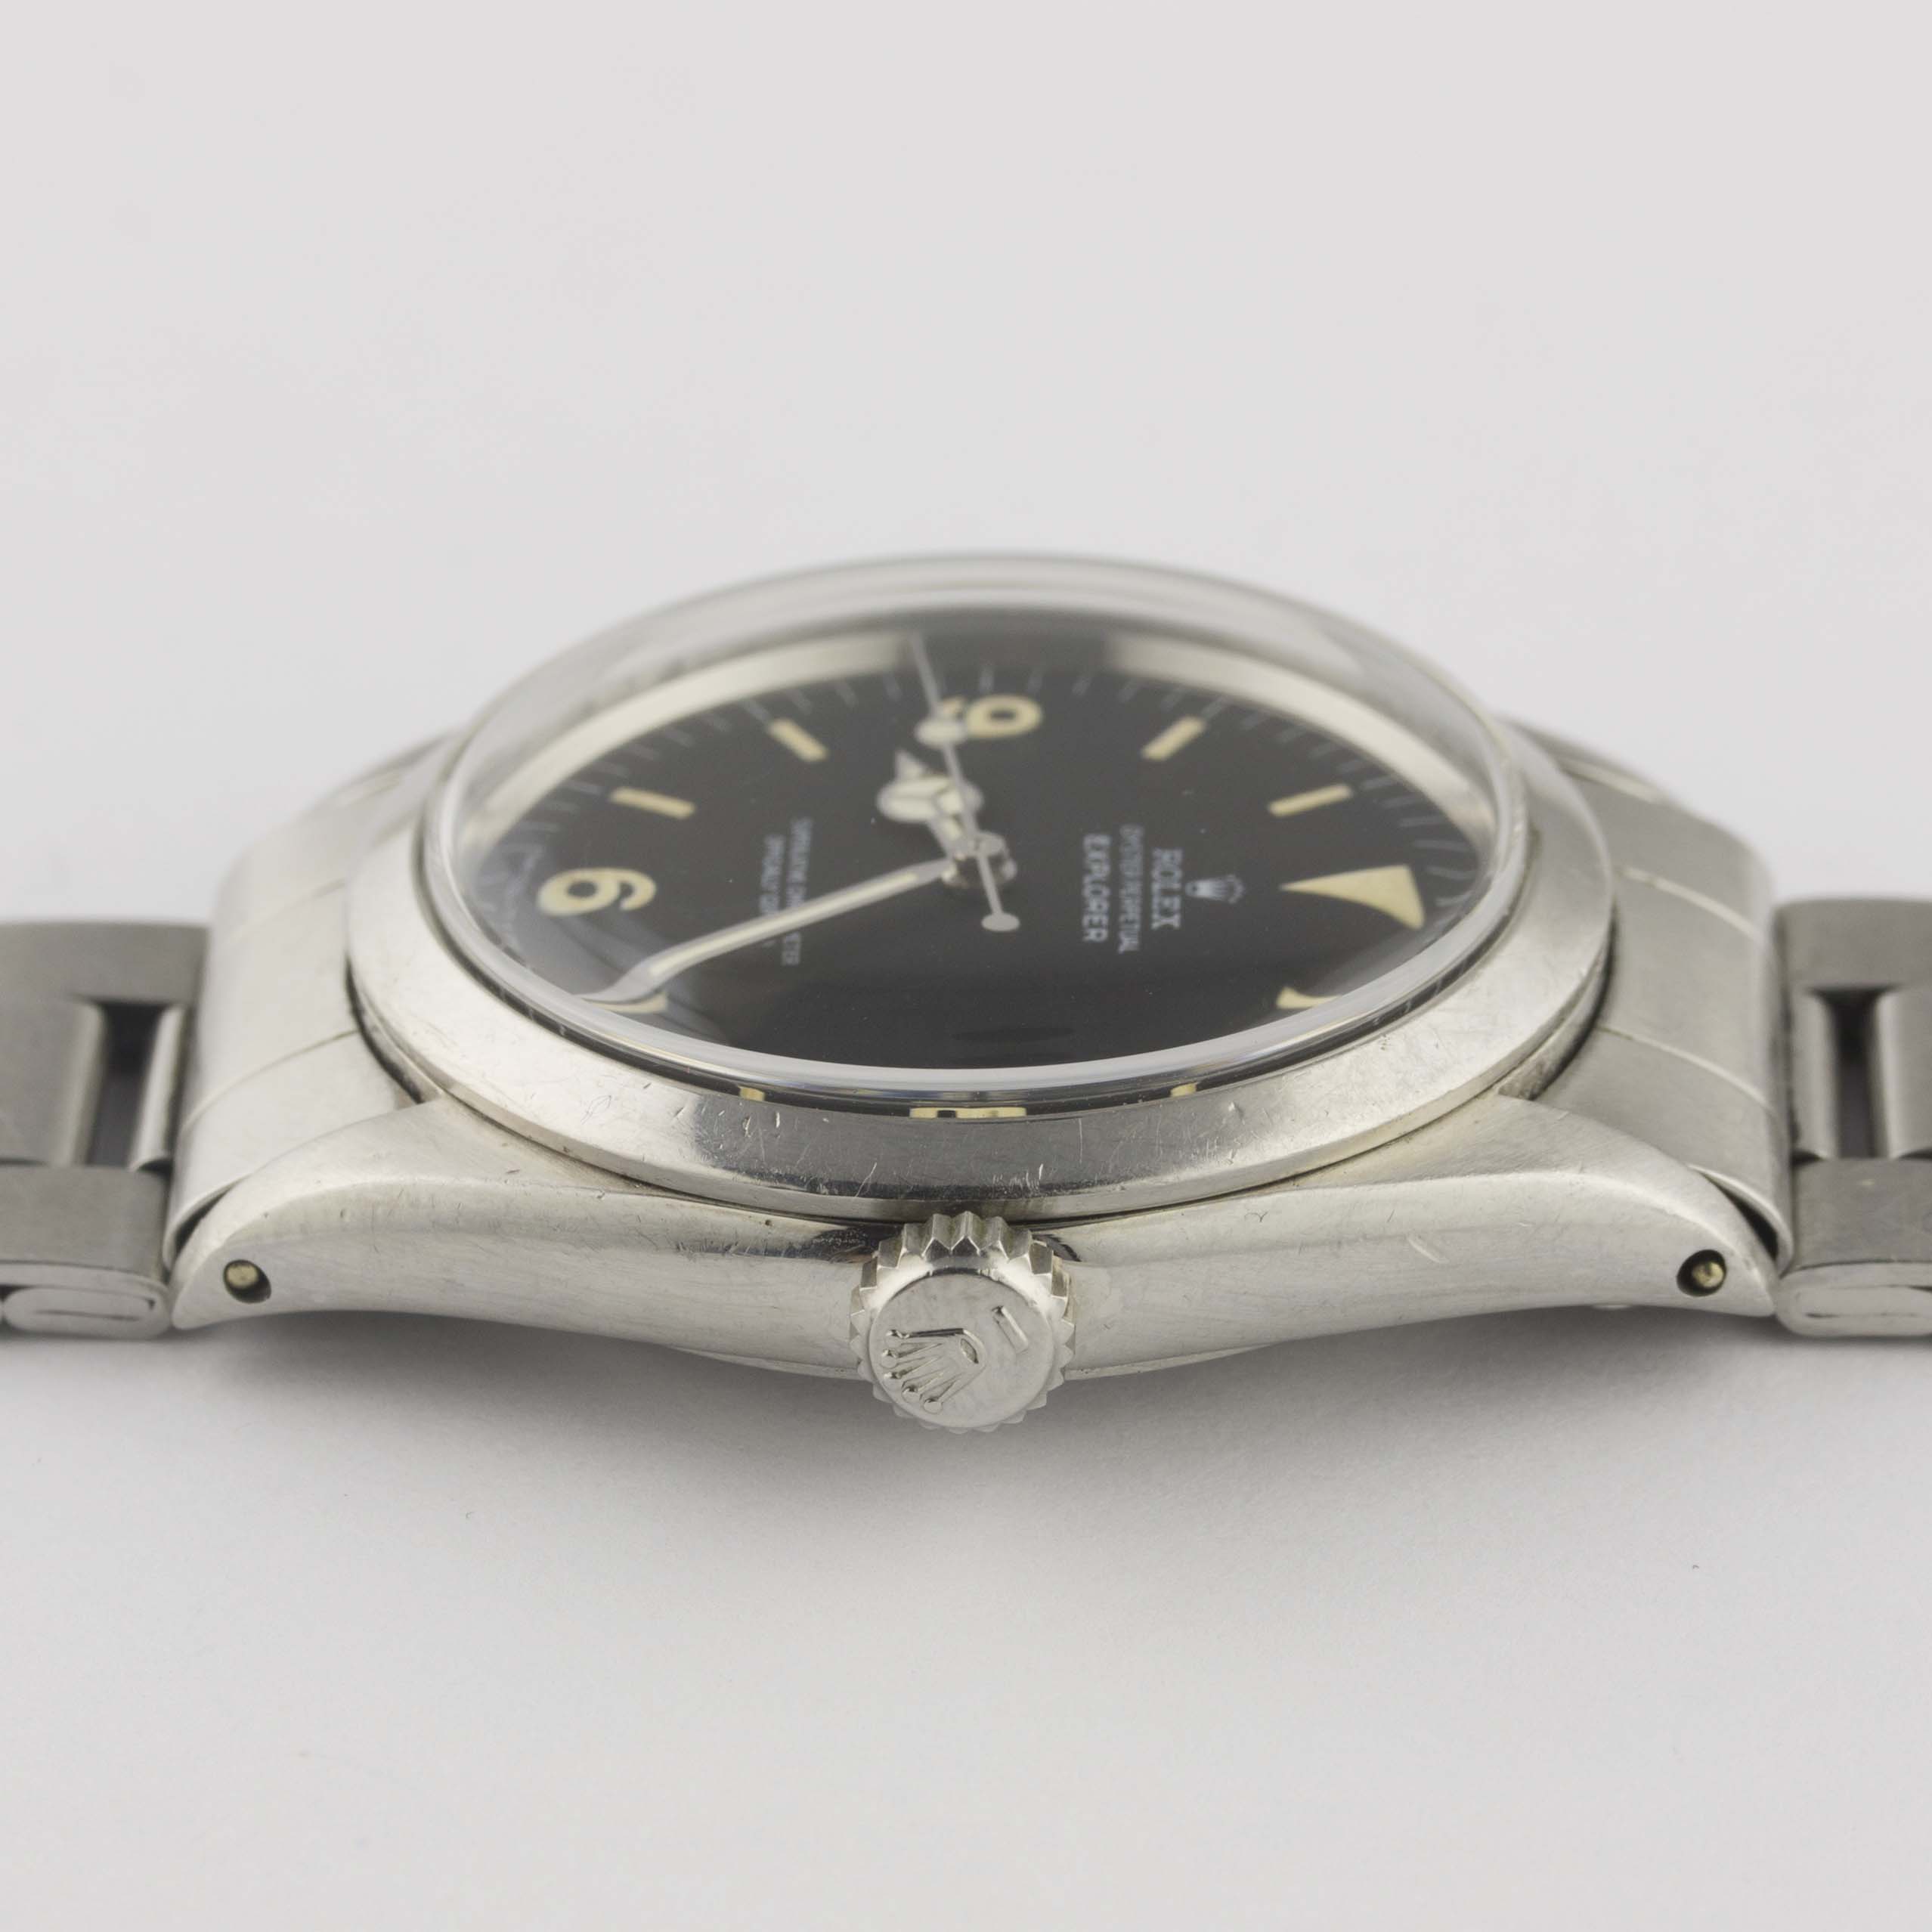 A GENTLEMAN'S STAINLESS STEEL ROLEX OYSTER PERPETUAL EXPLORER BRACELET WATCH CIRCA 1963, REF. 1016 - Image 10 of 11